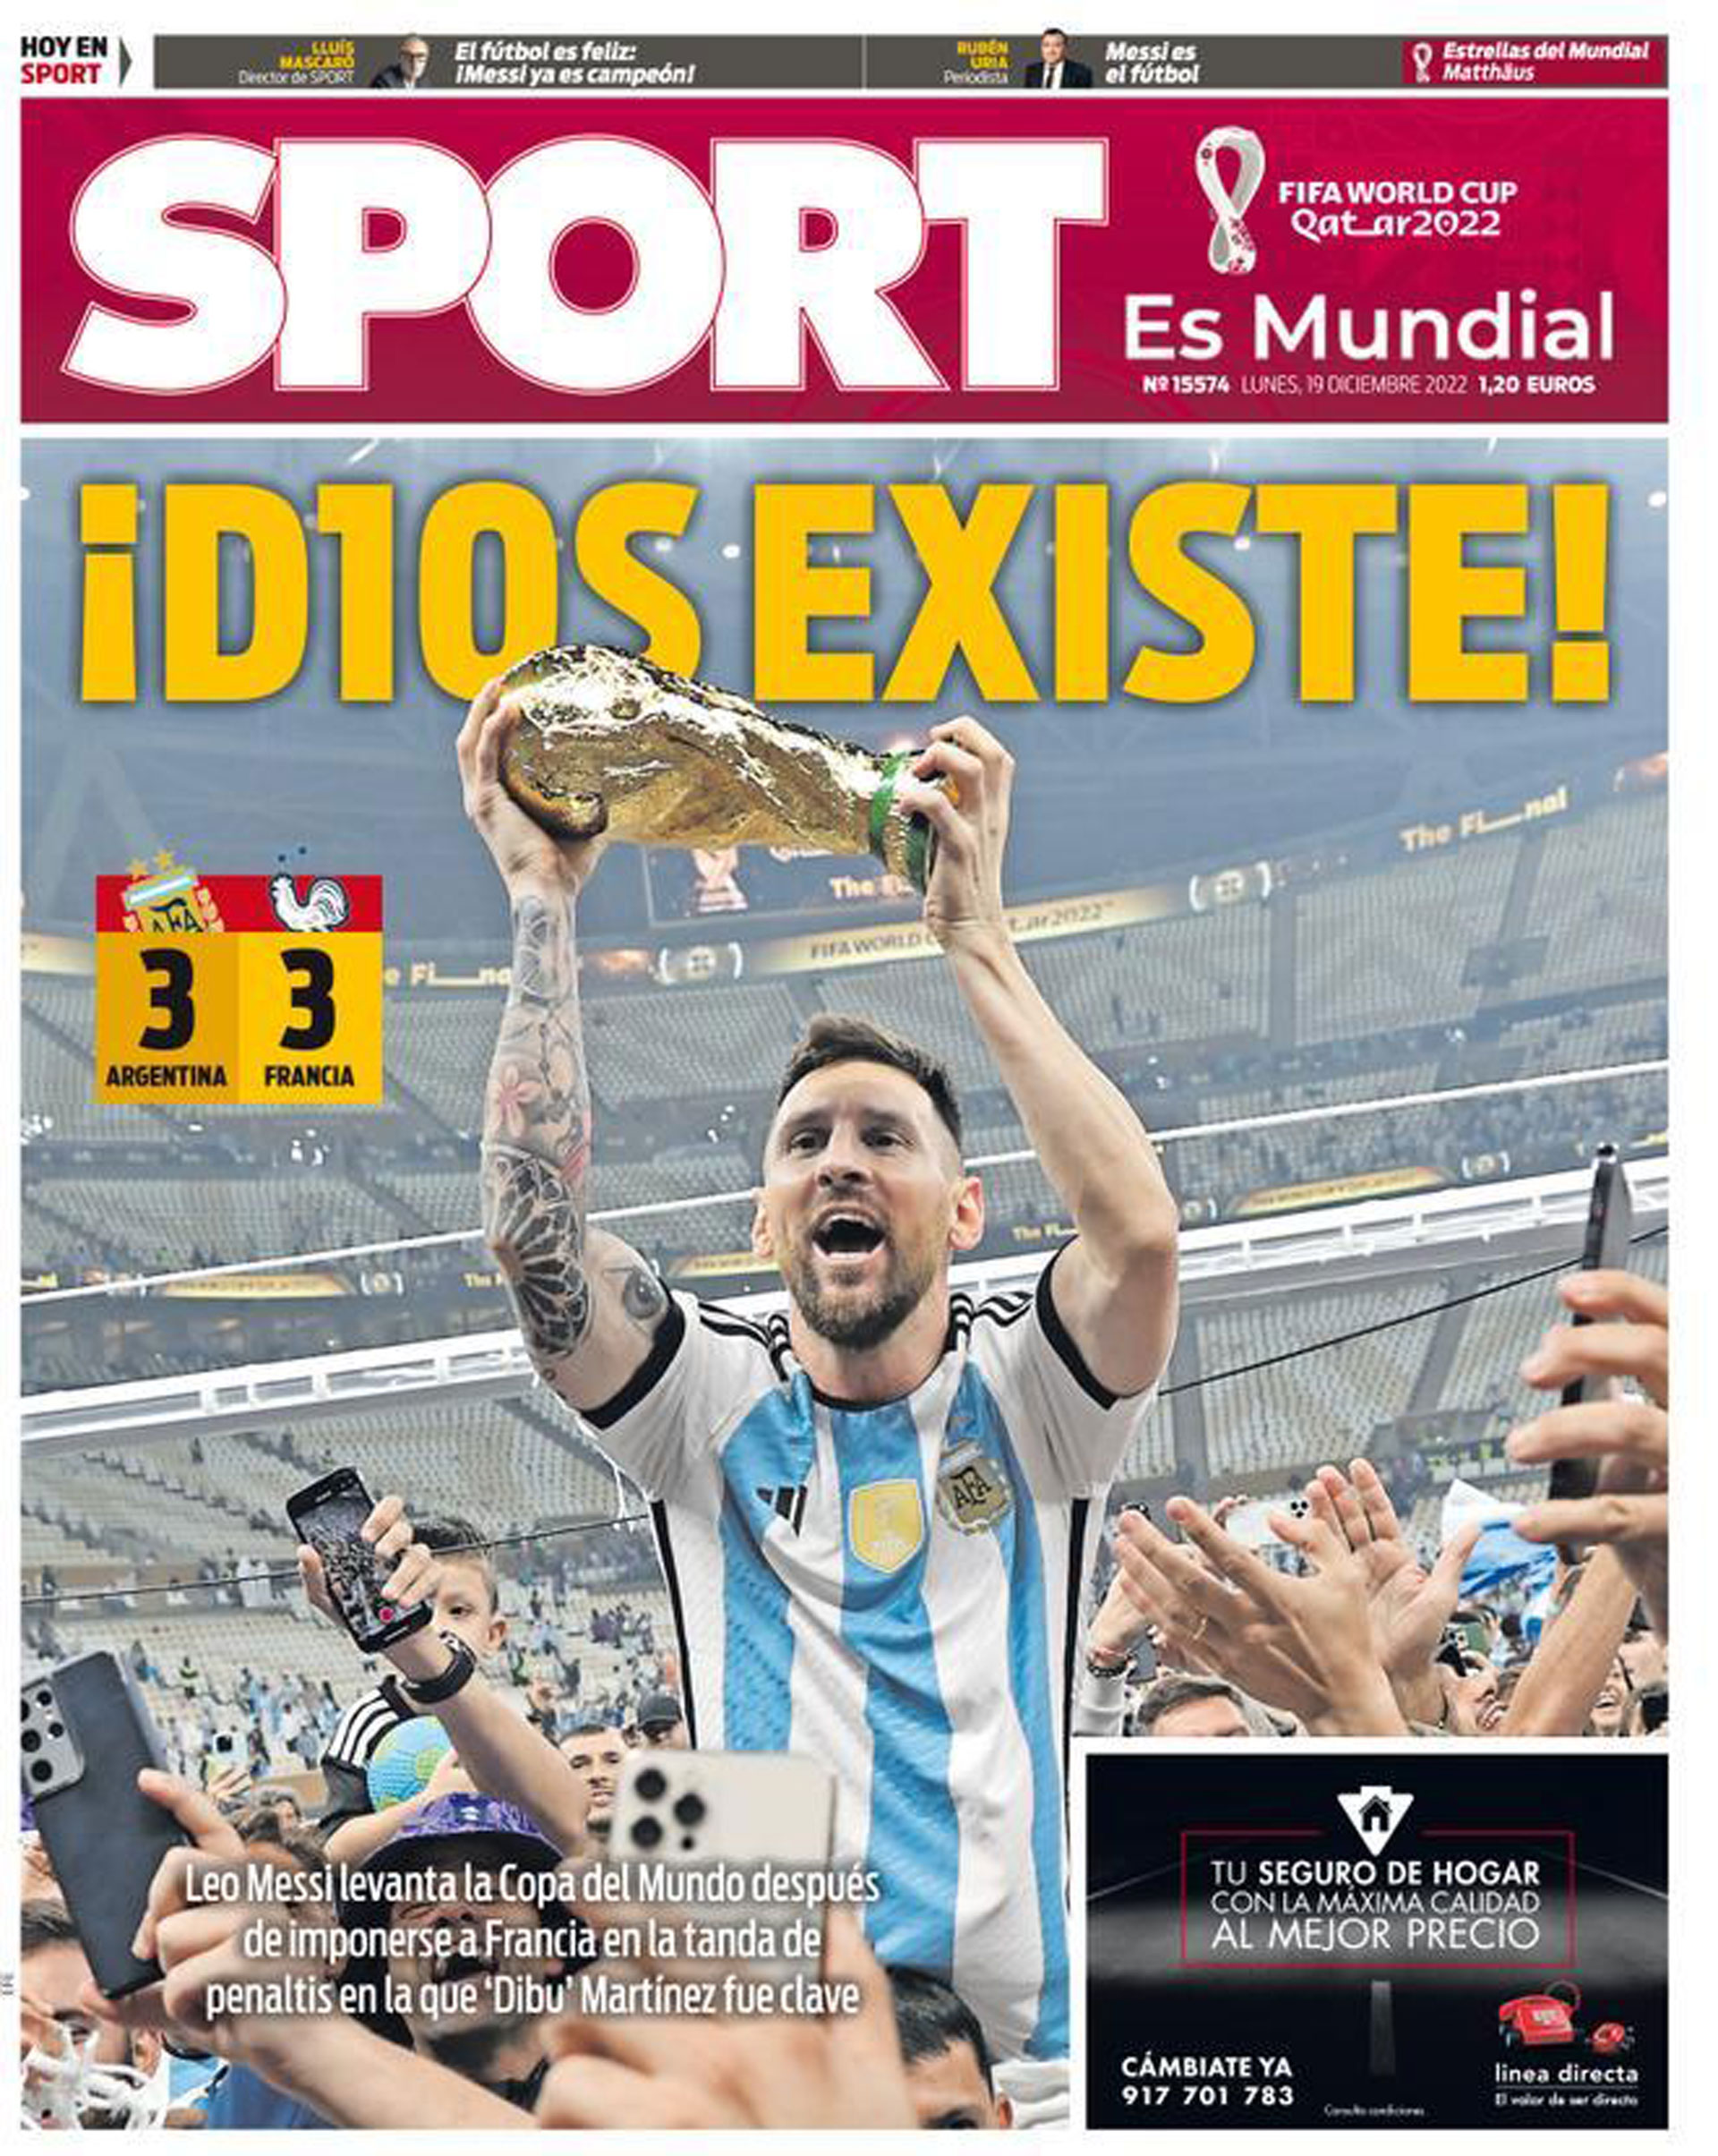 The cover of Sport for this Monday, December 19